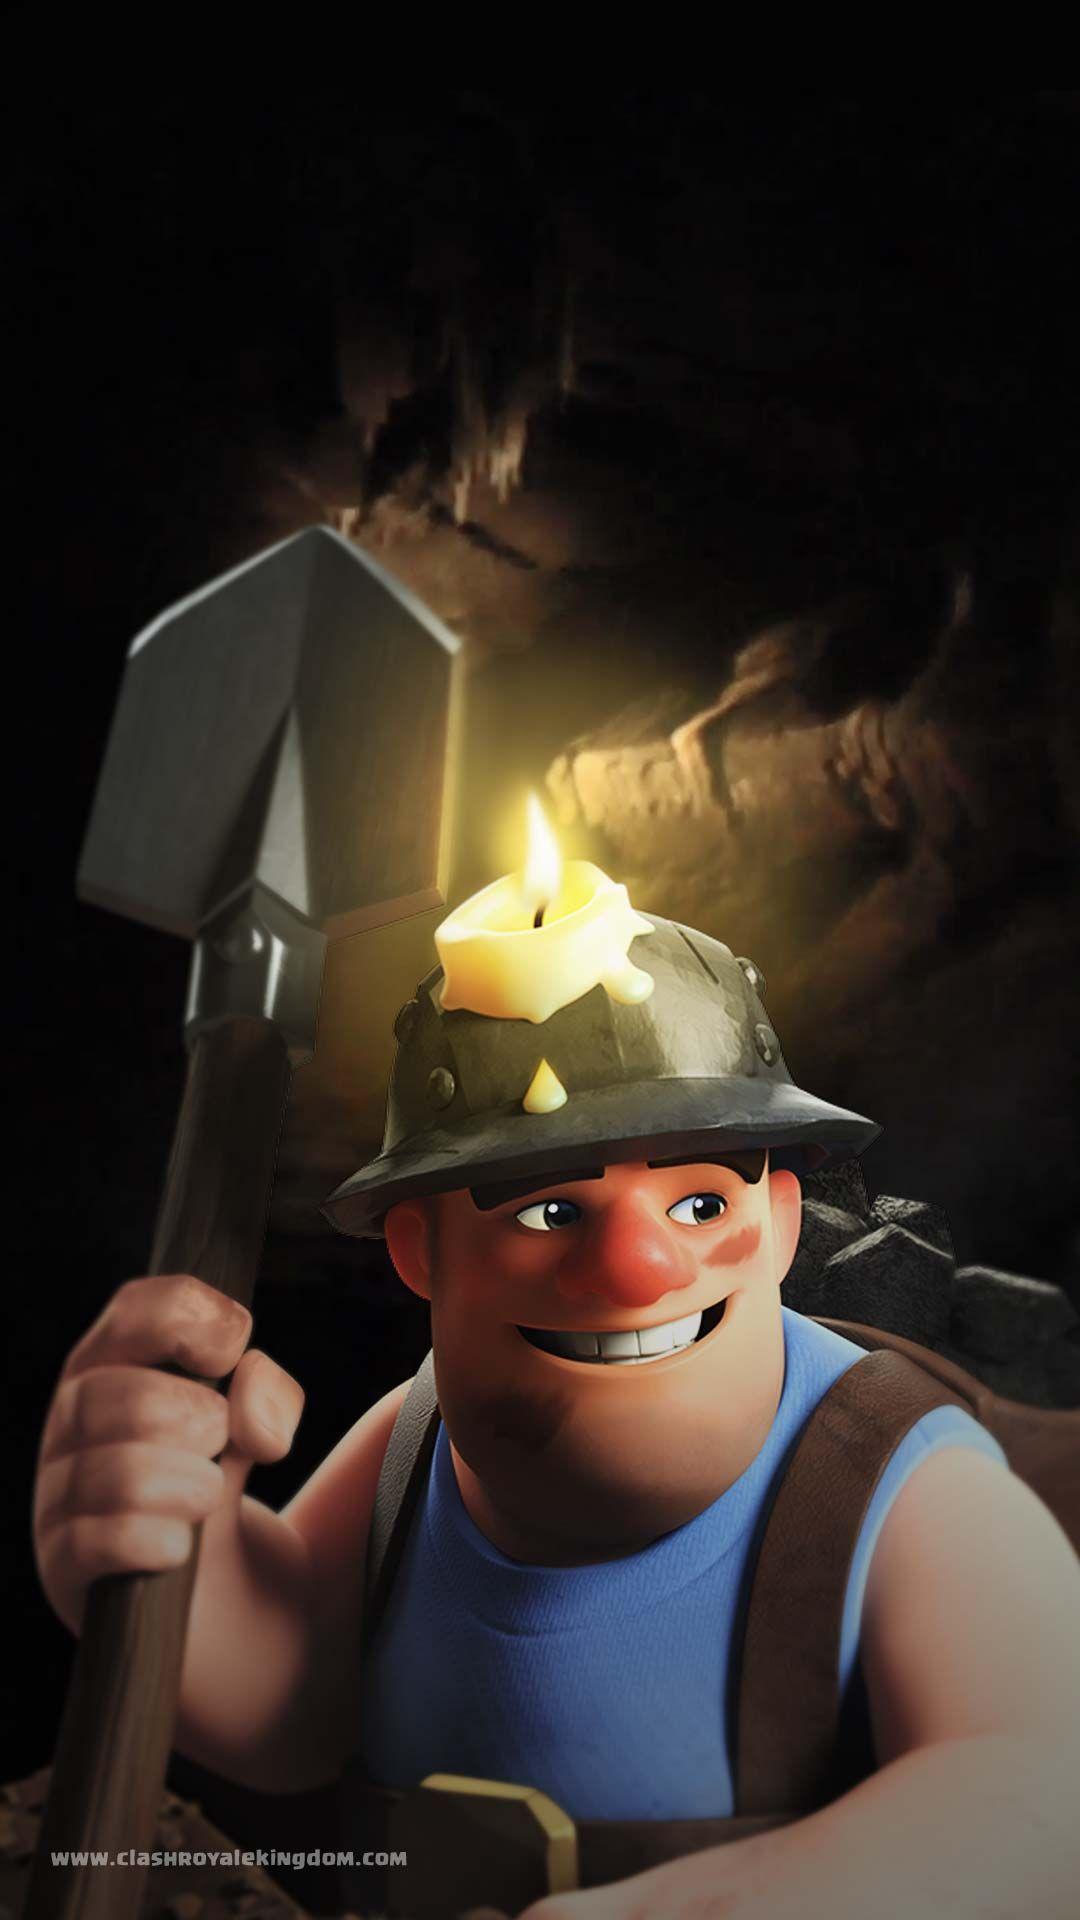 1.9 miner cycle in clash royale youtube on miner clash royale wallpapers